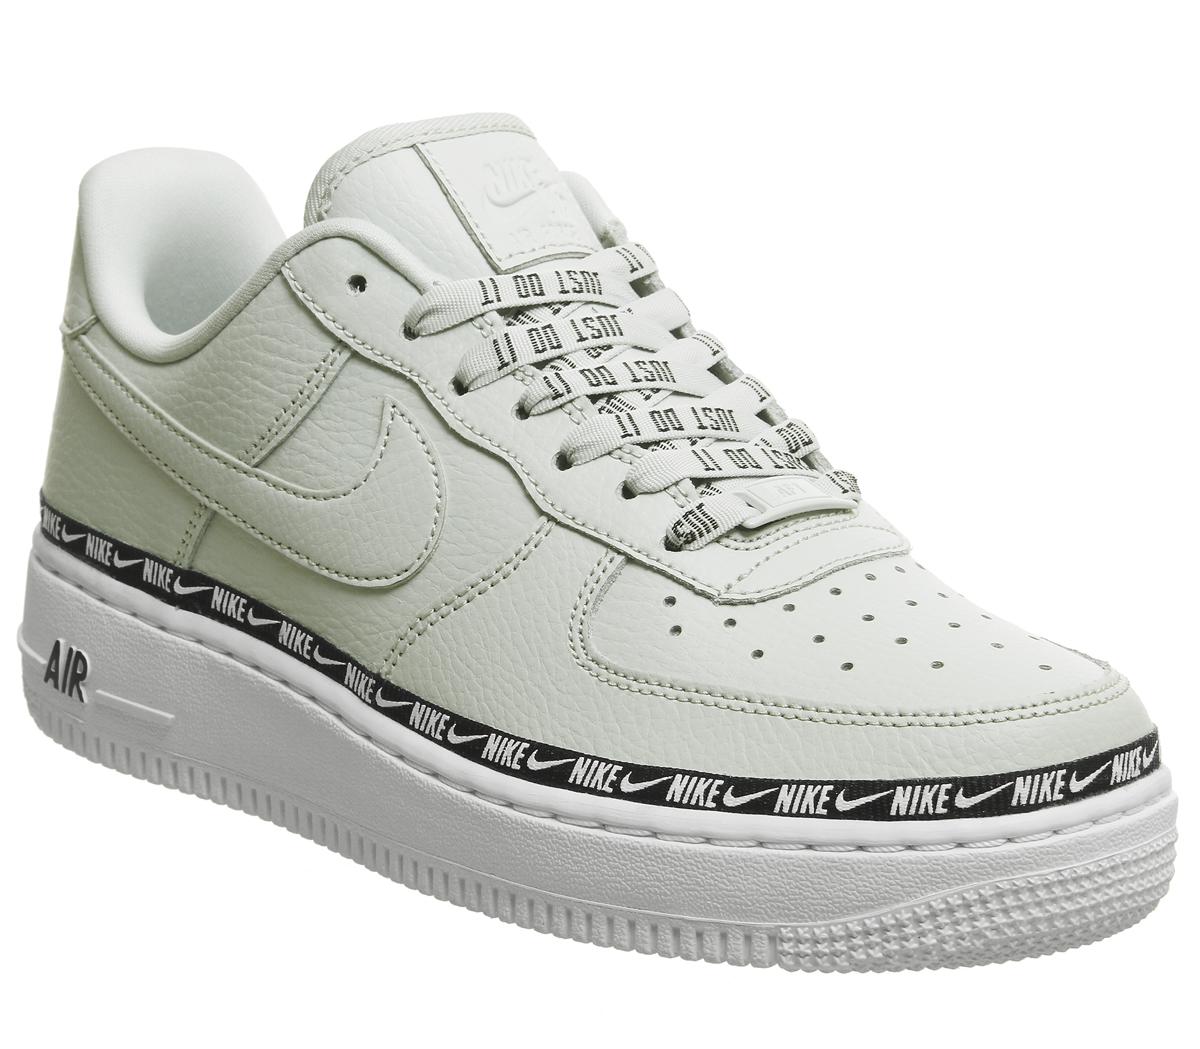 nike air force 1 black and white with writing